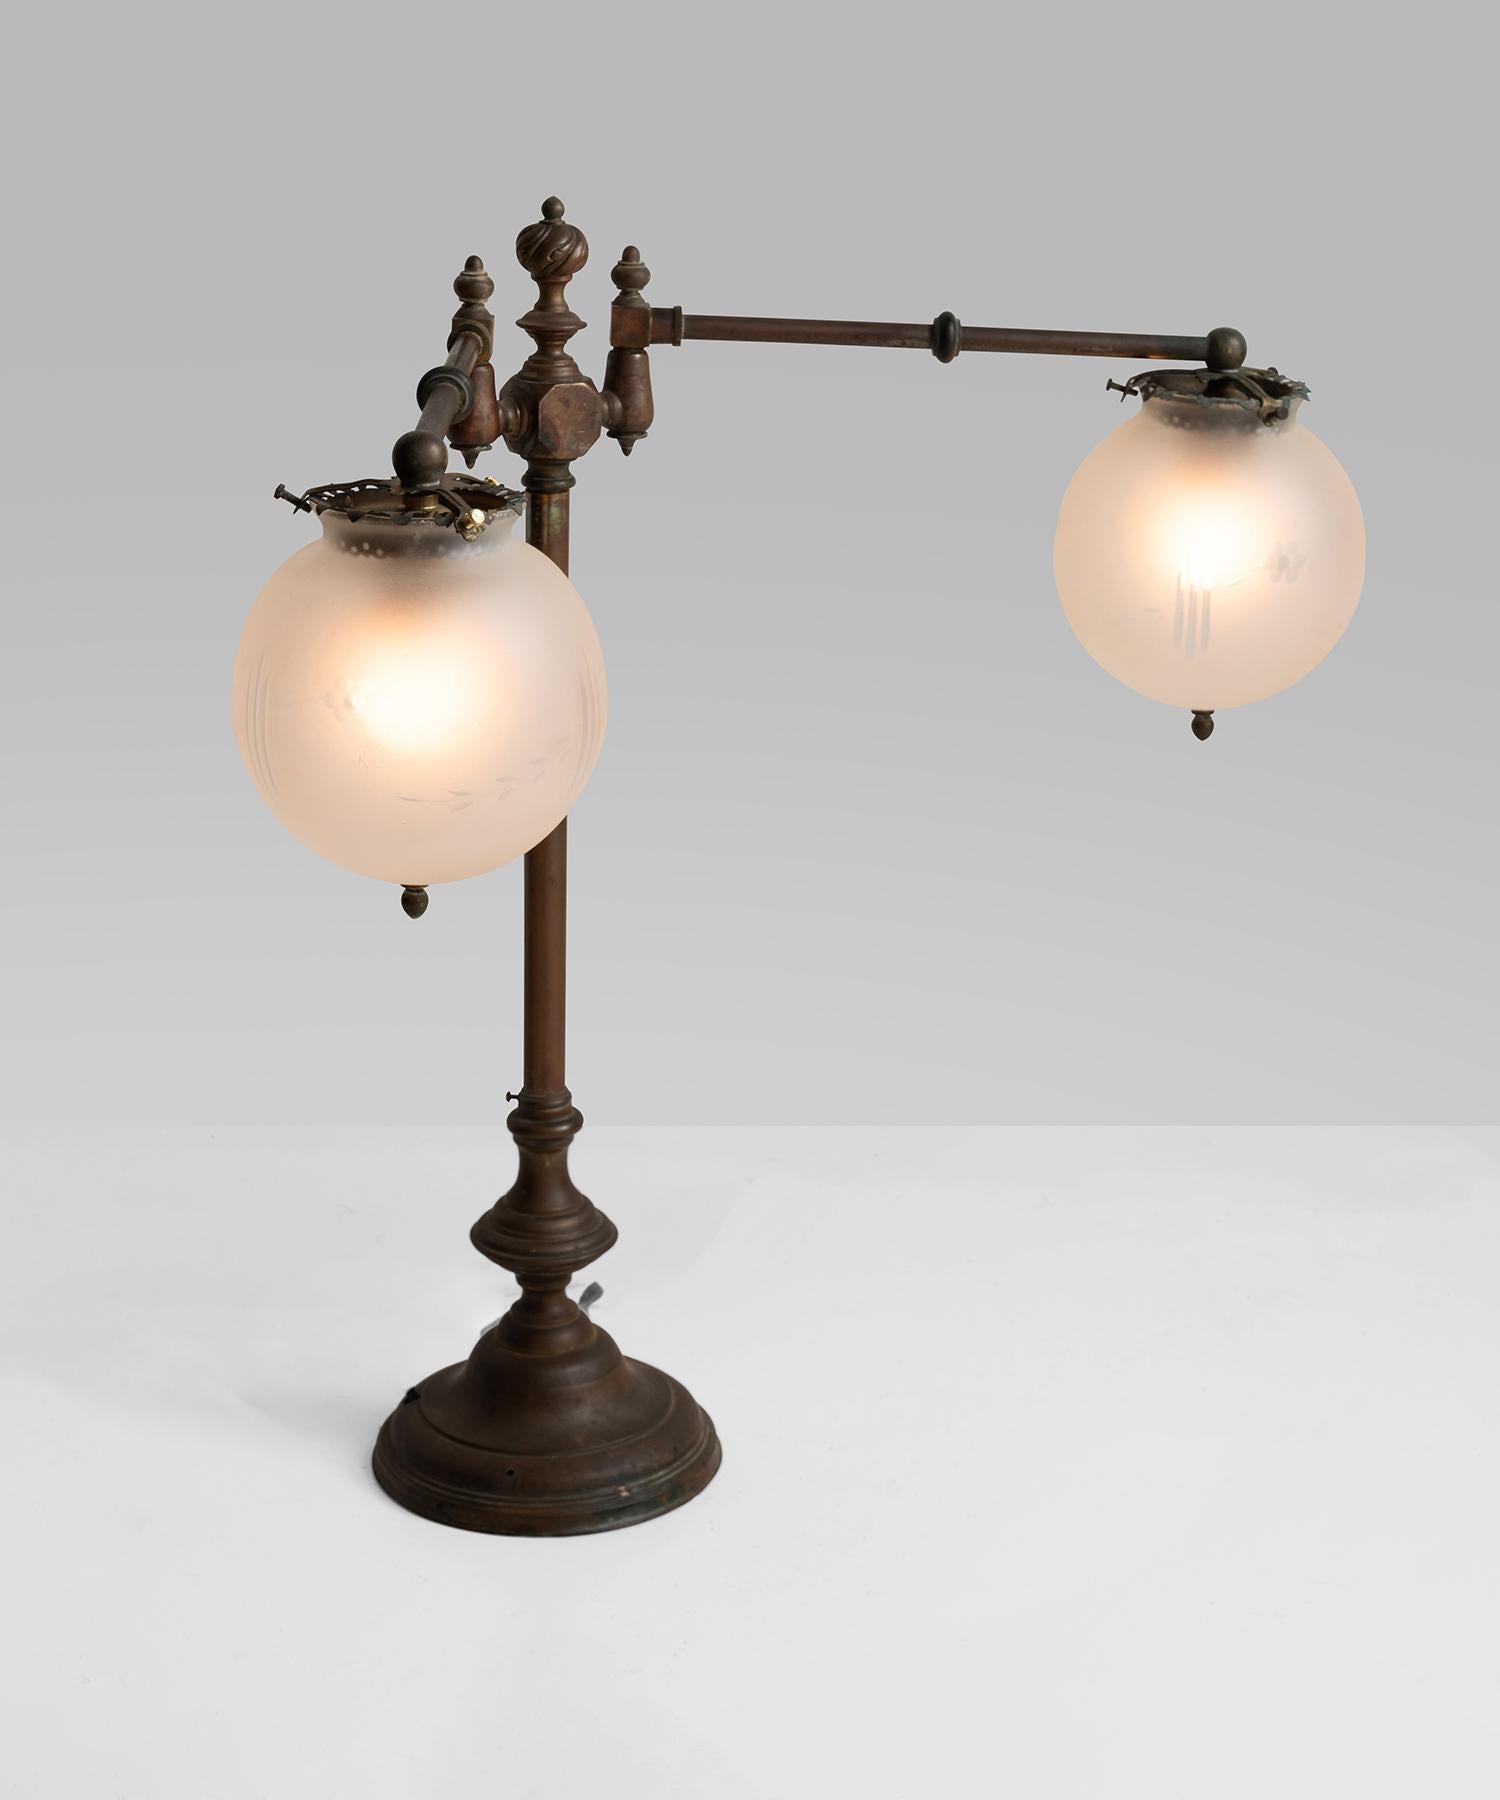 Unique articulating desk lamp with ornate finials and frosted glass shades with etched floral motif.